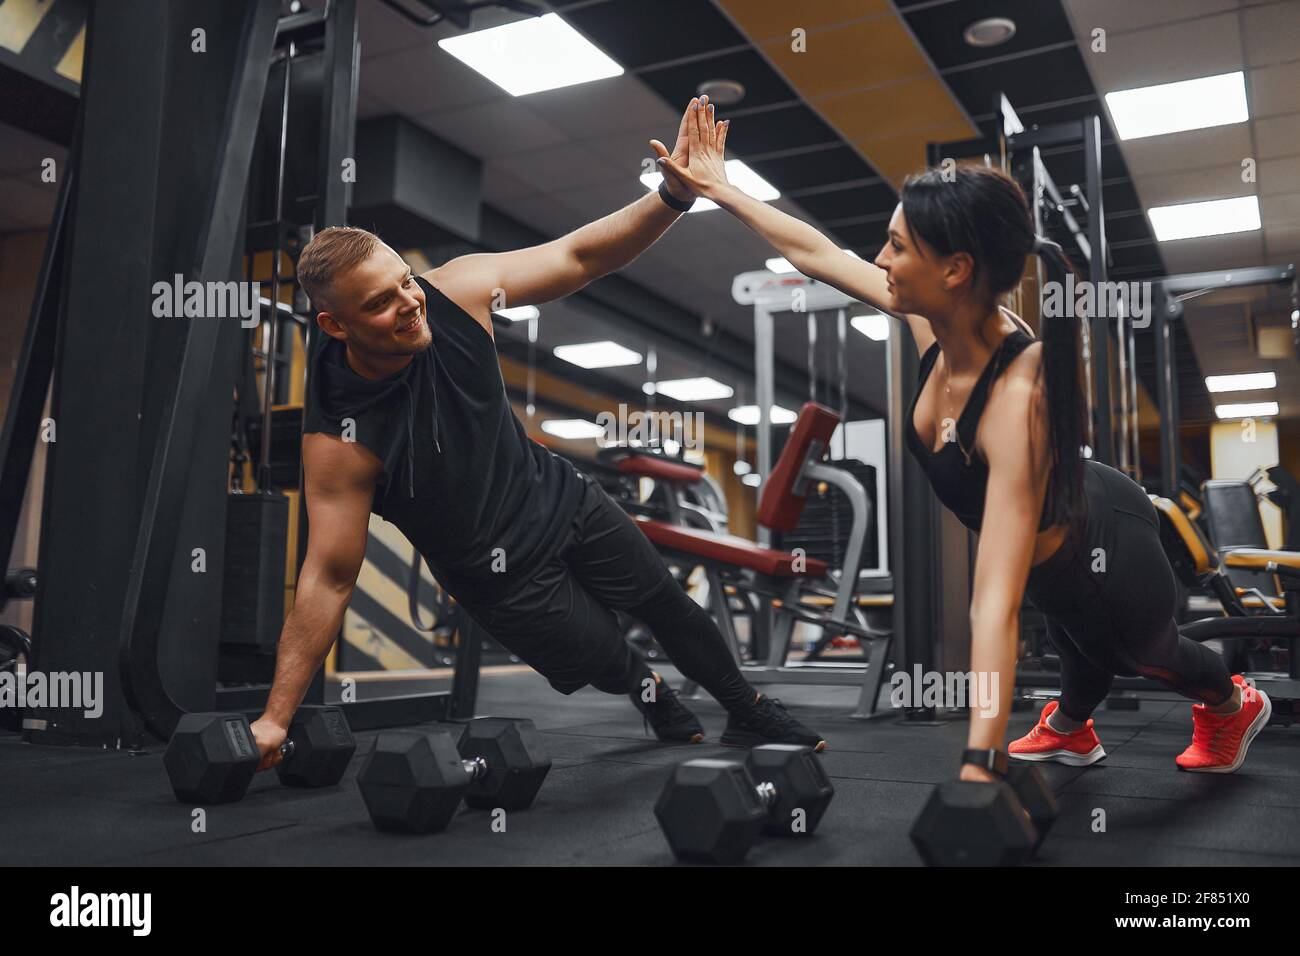 Strong and Beautiful Athletic Fitness Couple in Workout Clothes Doing Push  Up Exercises and Giving Each Other a High Five Stock Photo - Alamy